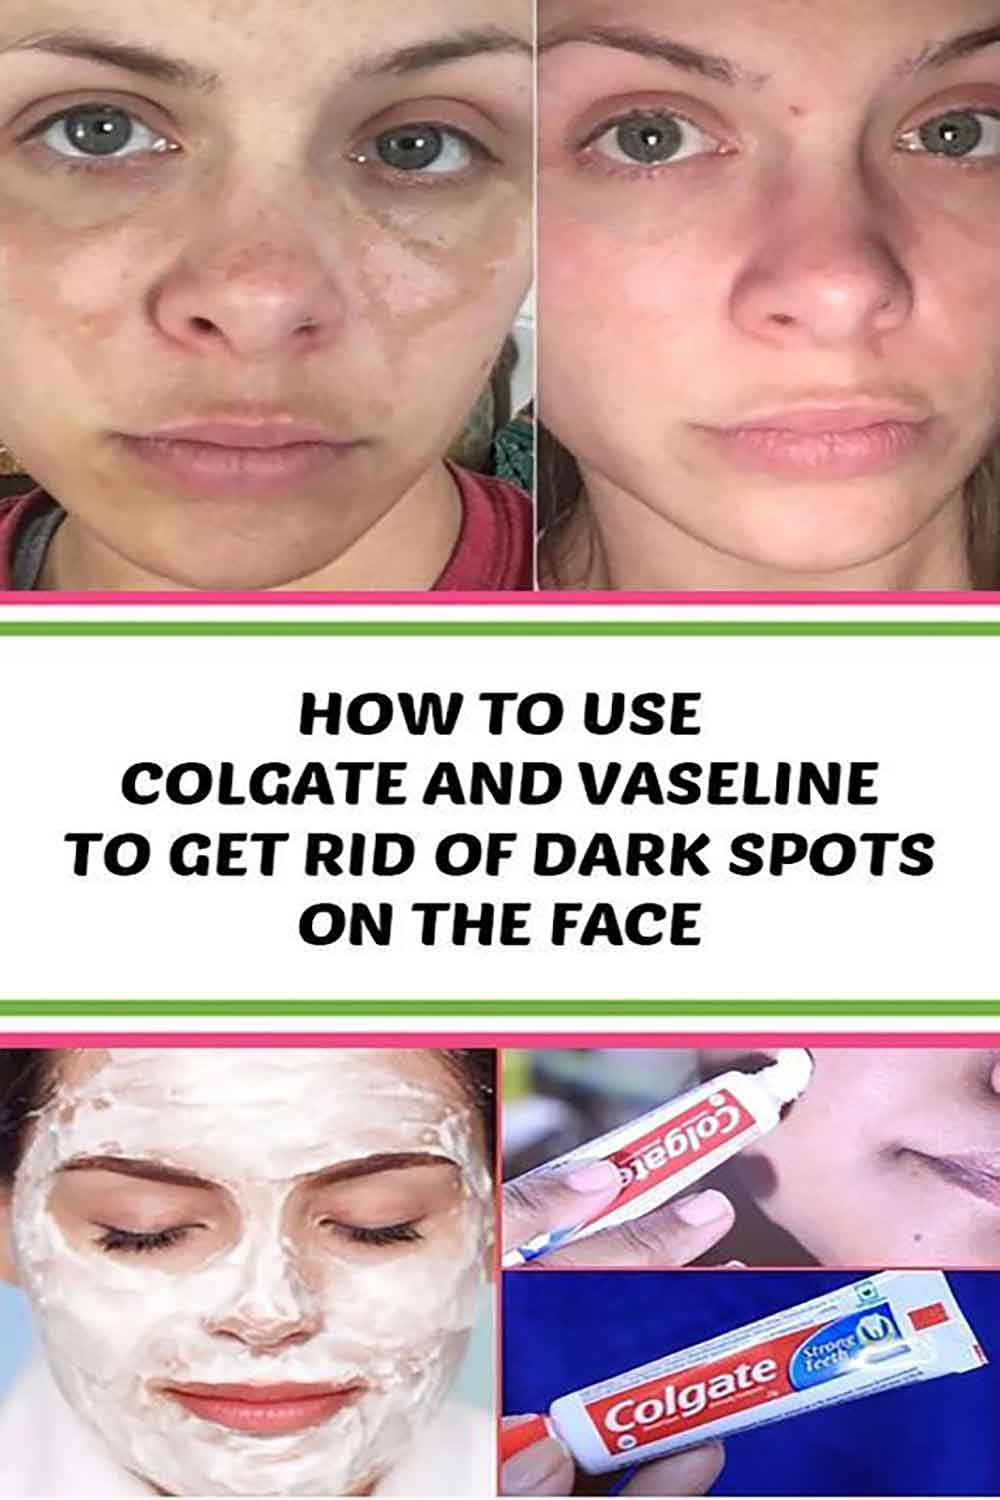 How to remove red, blue, dark spots, acne scars on the face, get rid of post-acne at home